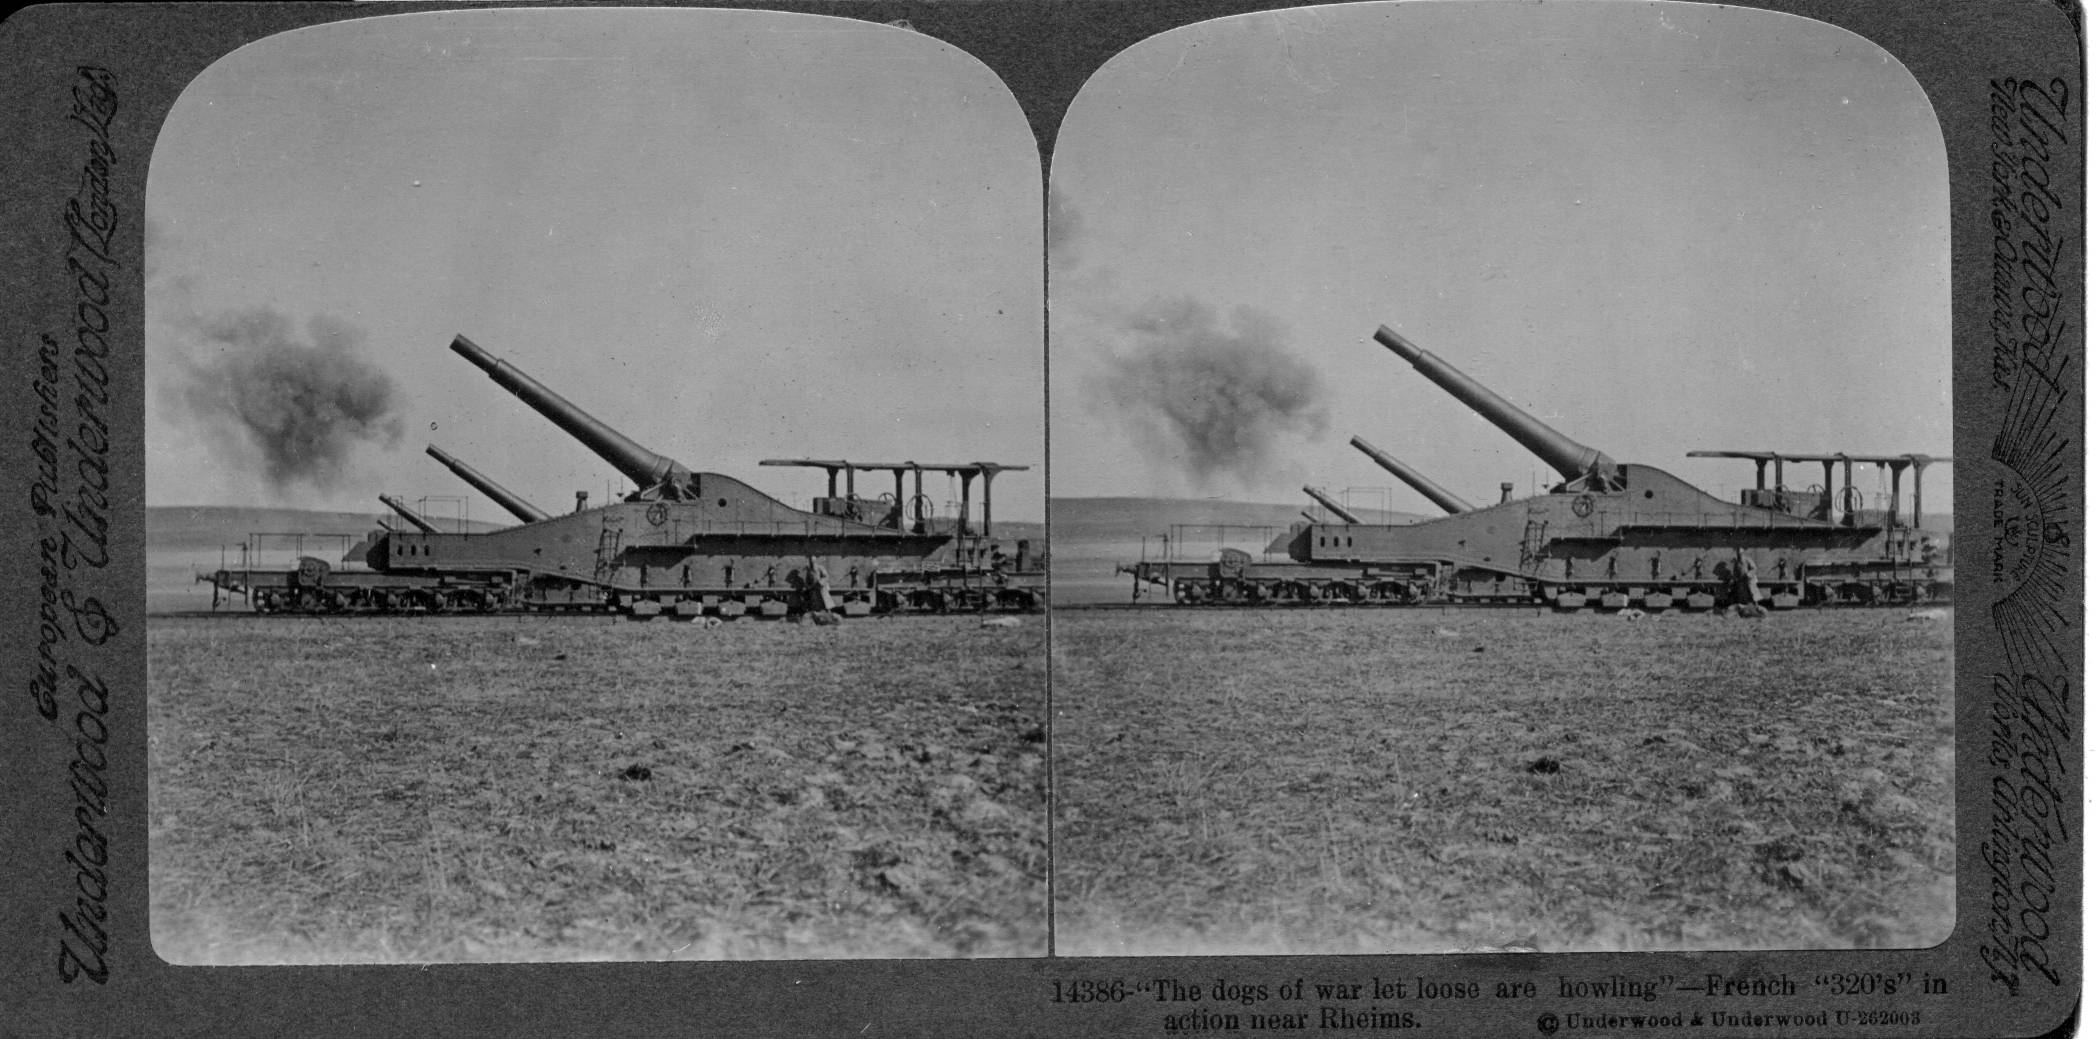 "The dogs of war let loose are howling"--French "320's" in action near Rheims